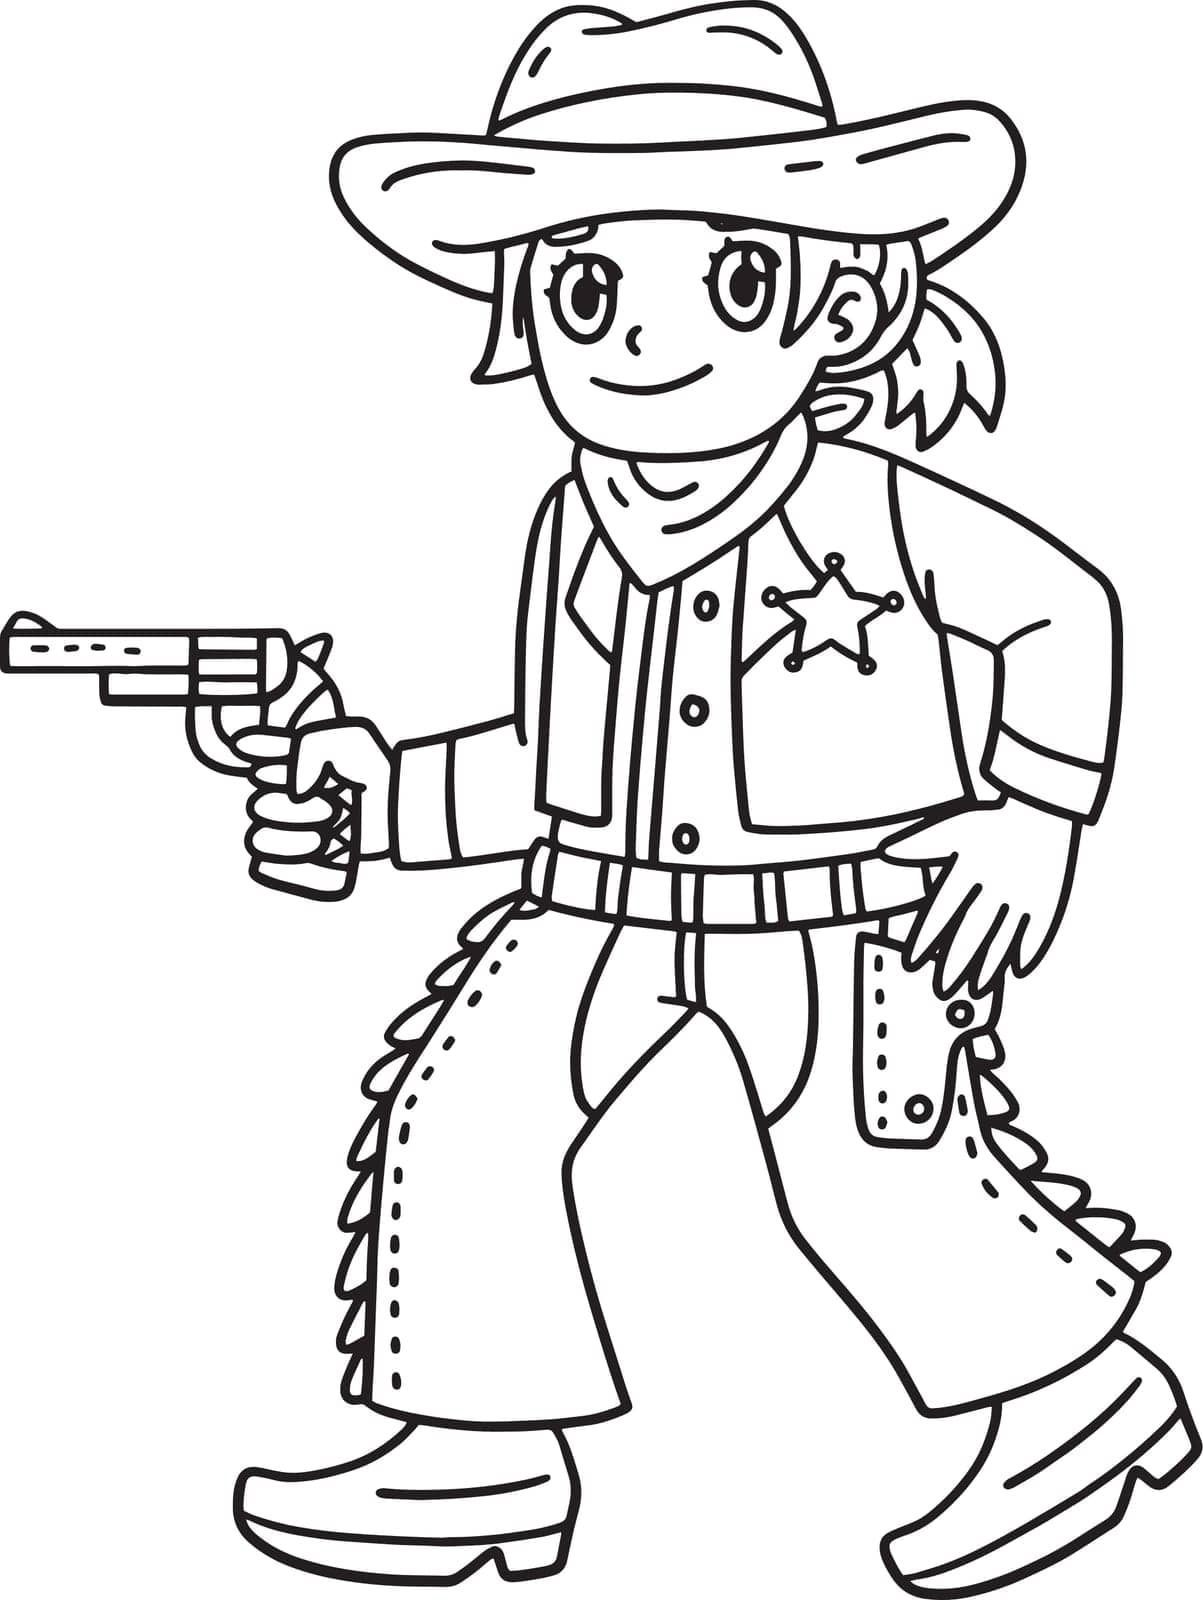 A cute and funny coloring page of a Cowgirl with a Gun. Provides hours of coloring fun for children. To color, this page is very easy. Suitable for little kids and toddlers.